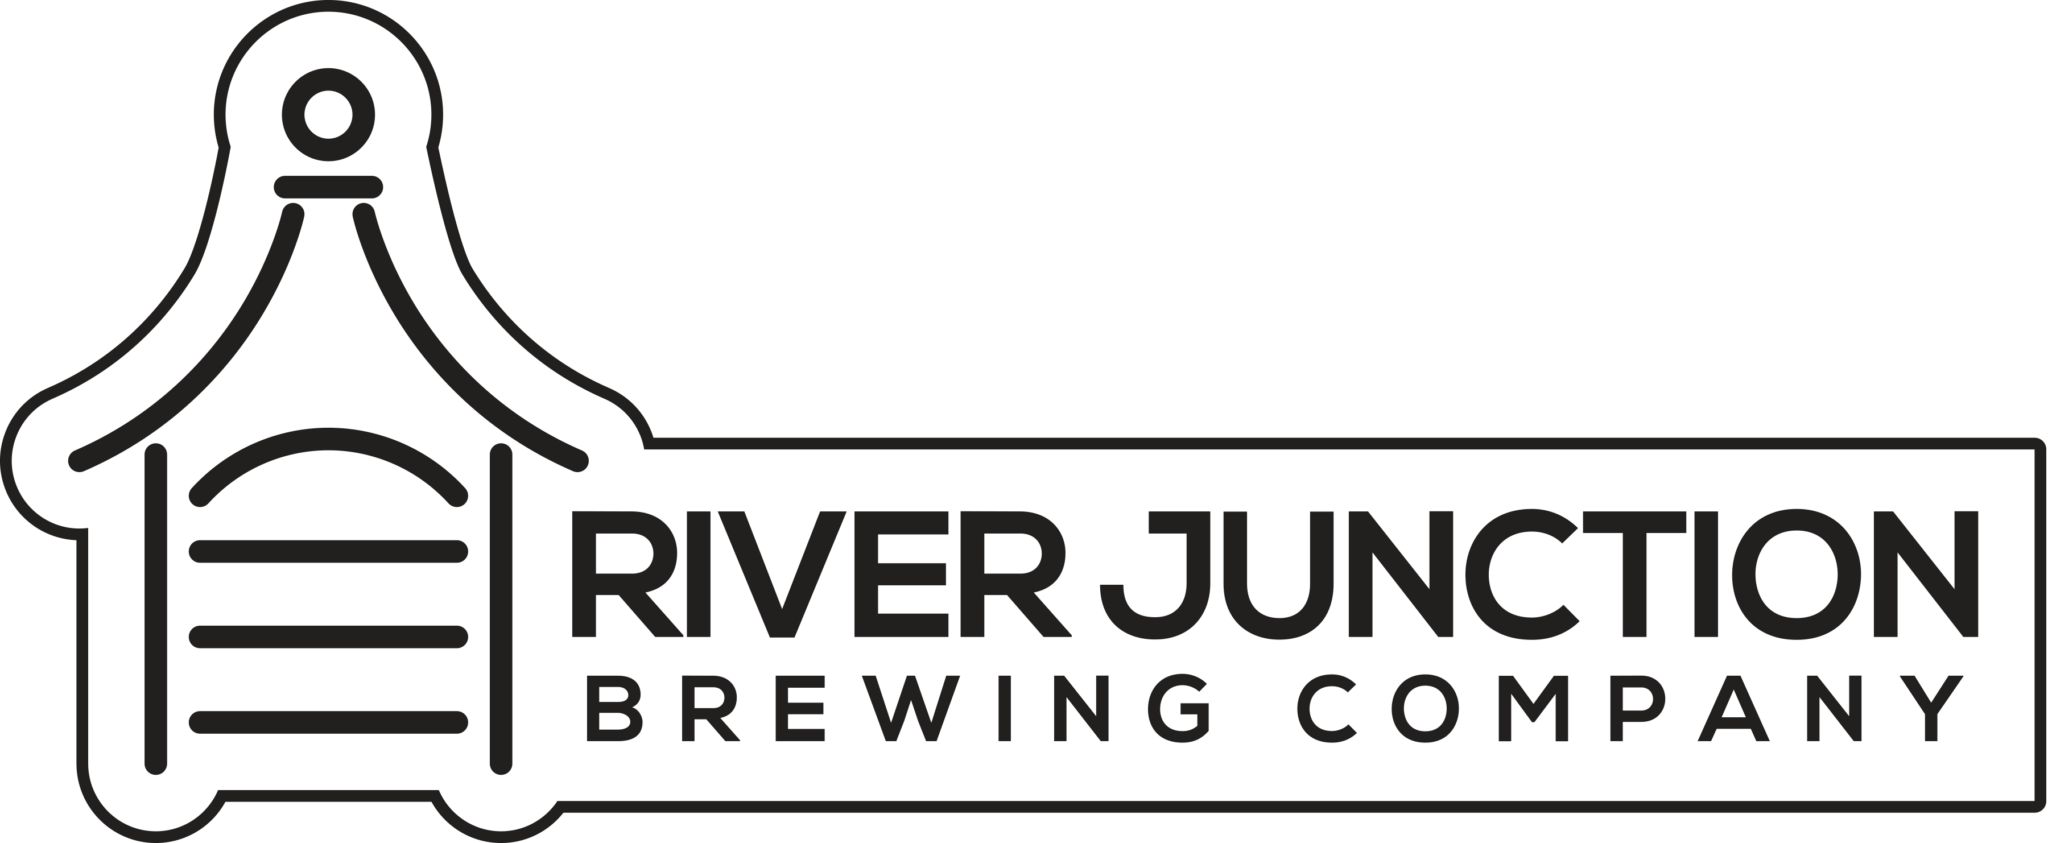 River Junction Brewing Company